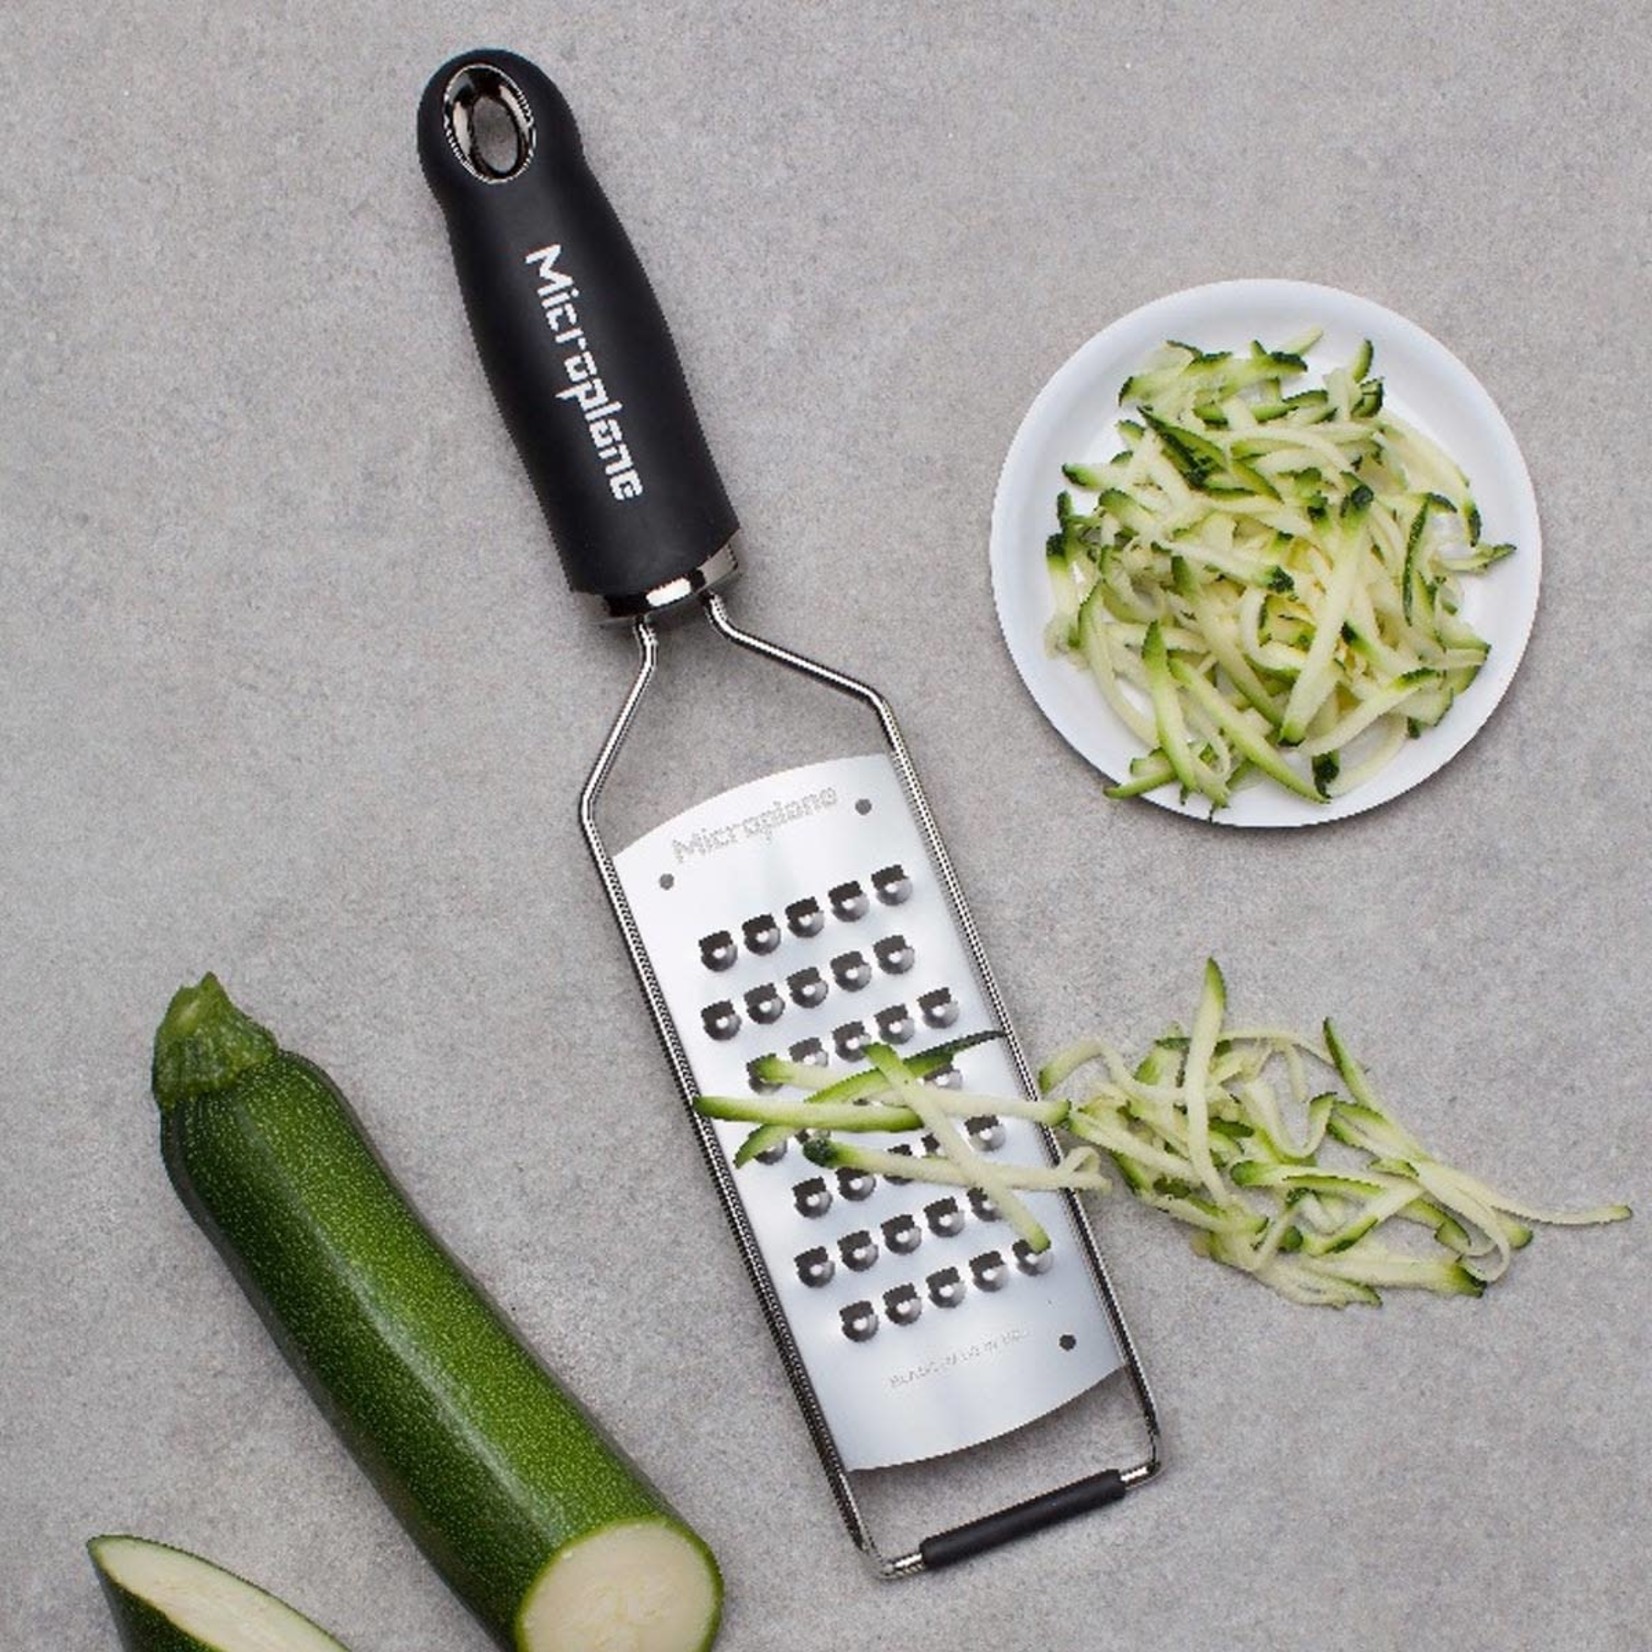 MICROPLANE MICROPLANE Gourmet Extra Coarse Grater